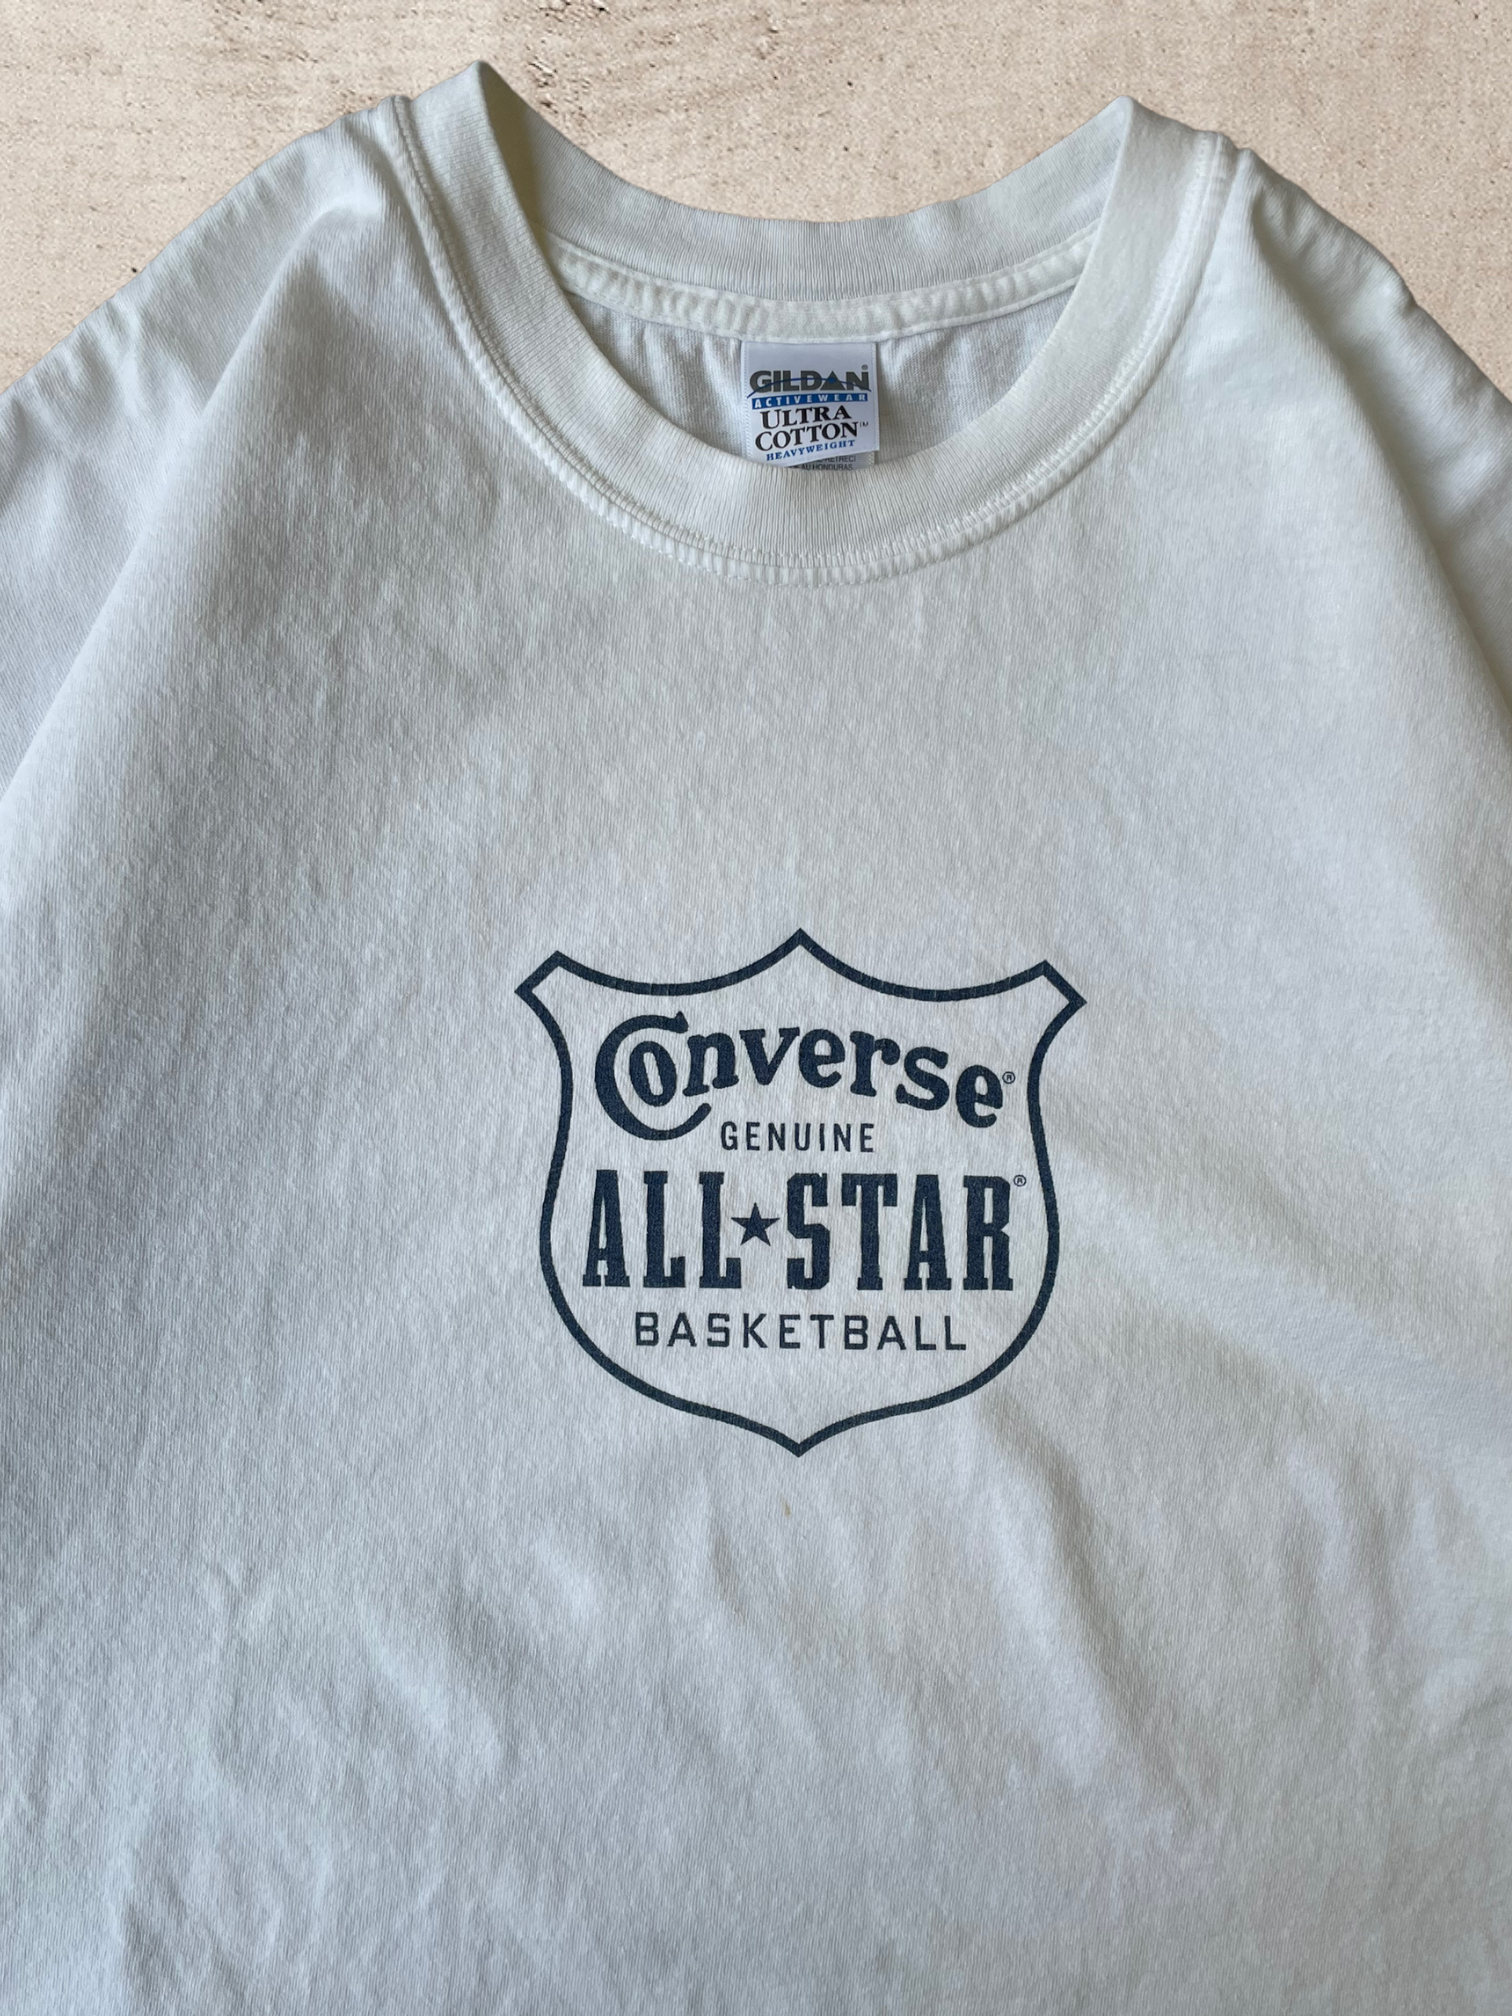 90s Converse All Star Basketball T-Shirt - X-Large